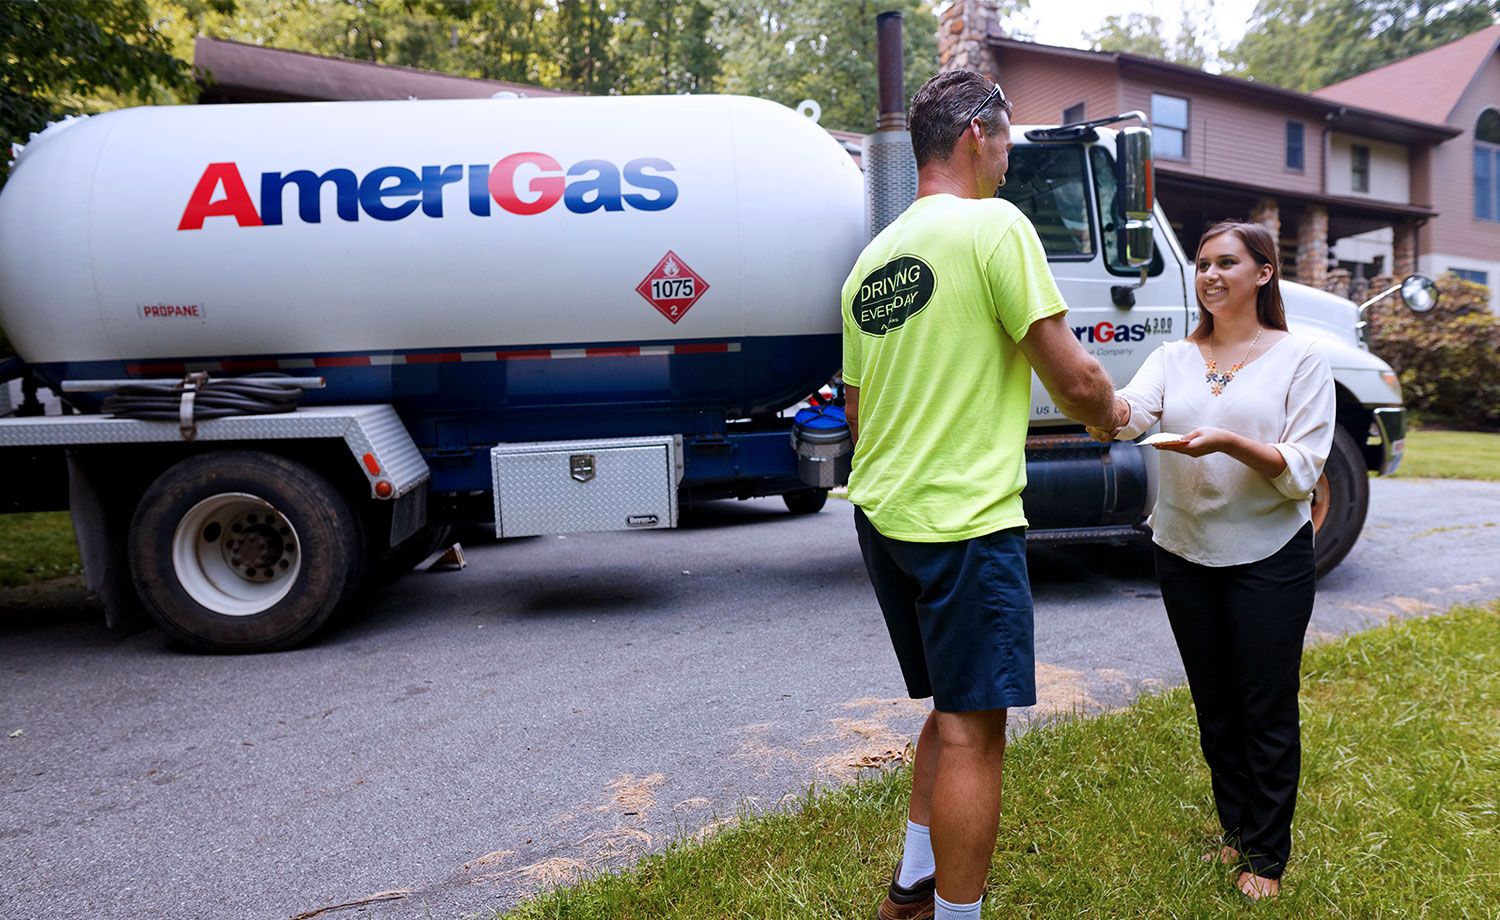 Man and woman shake hands in front of Amerigas truck